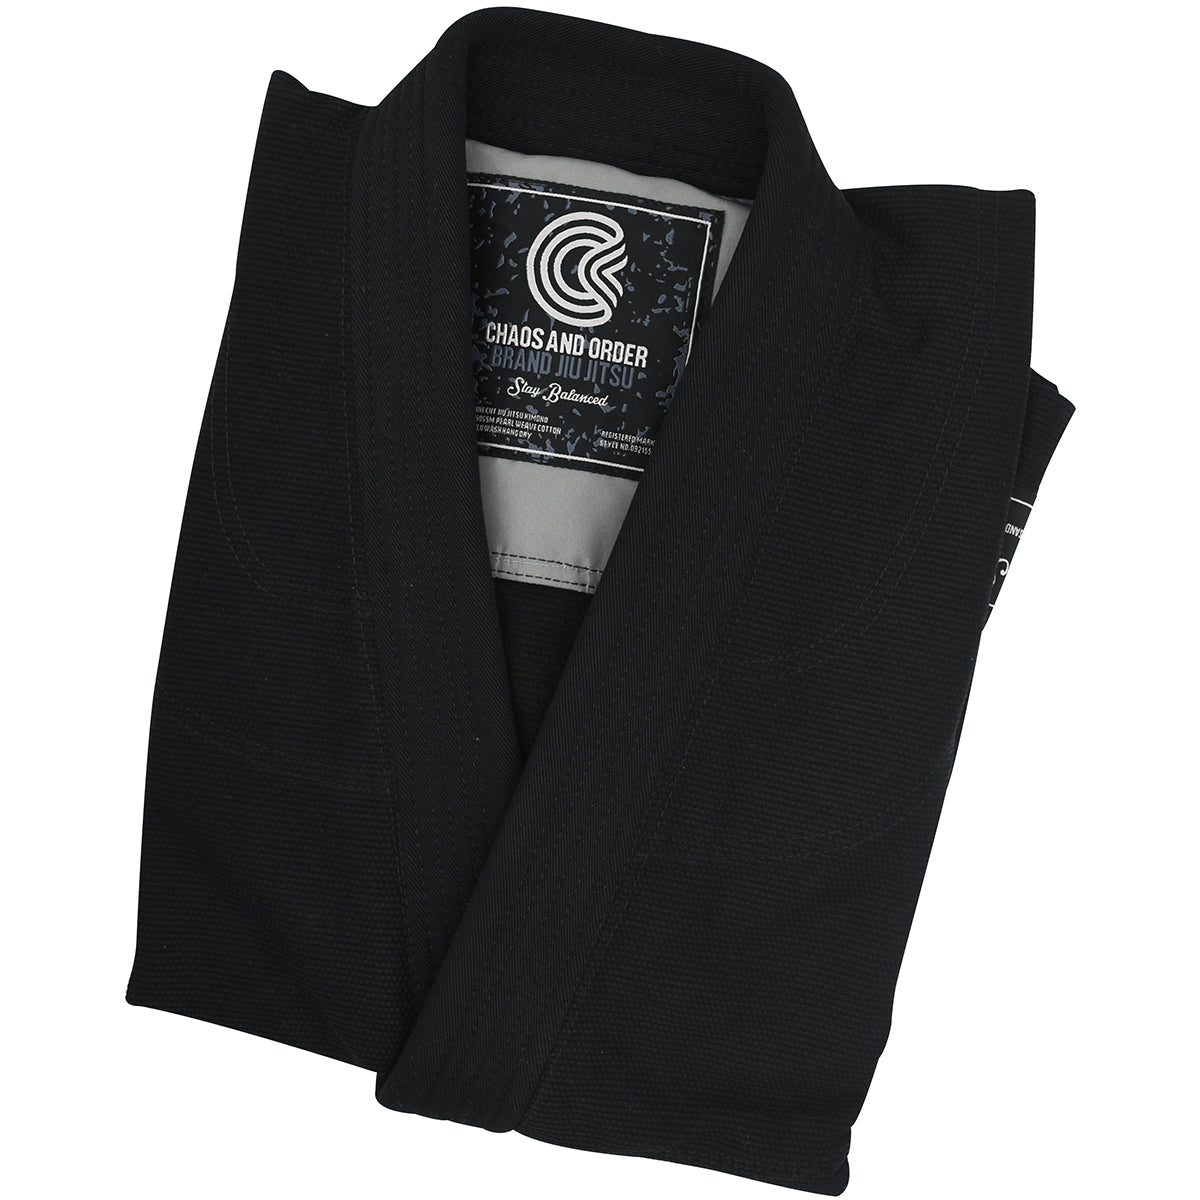 Chaos and Order Static Label BJJ Gi - Black Chaos and Order